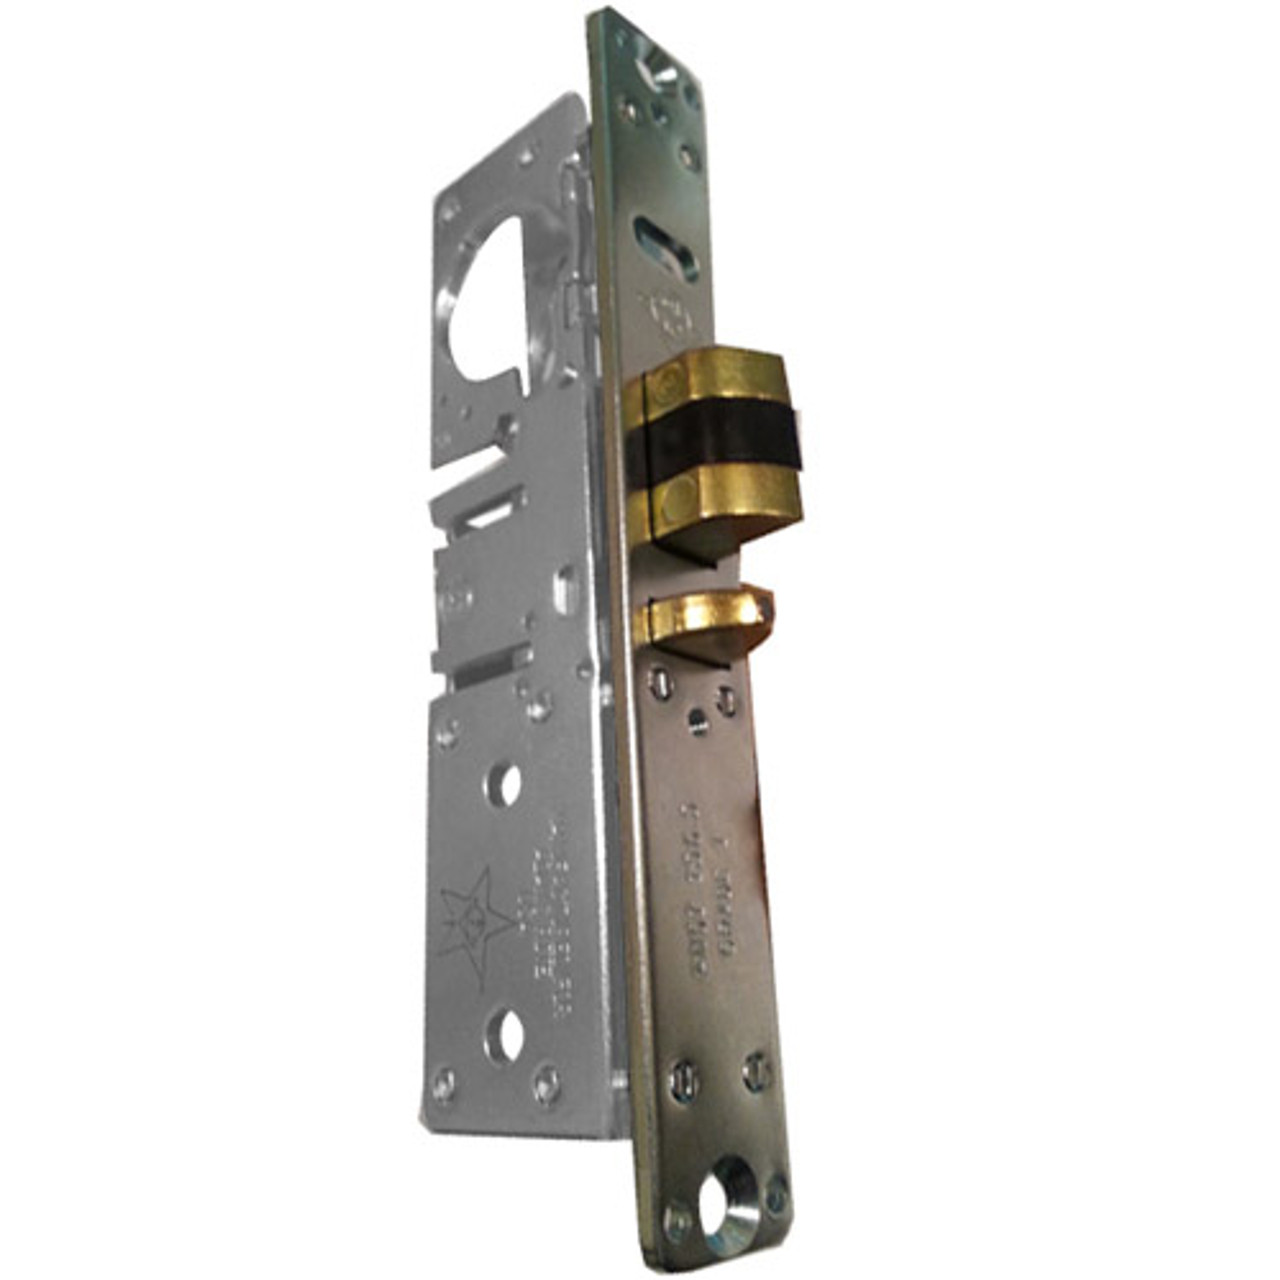 4530-35-102-628 Adams Rite Deadlatch with Flat faceplate in Clear Anodized Finish